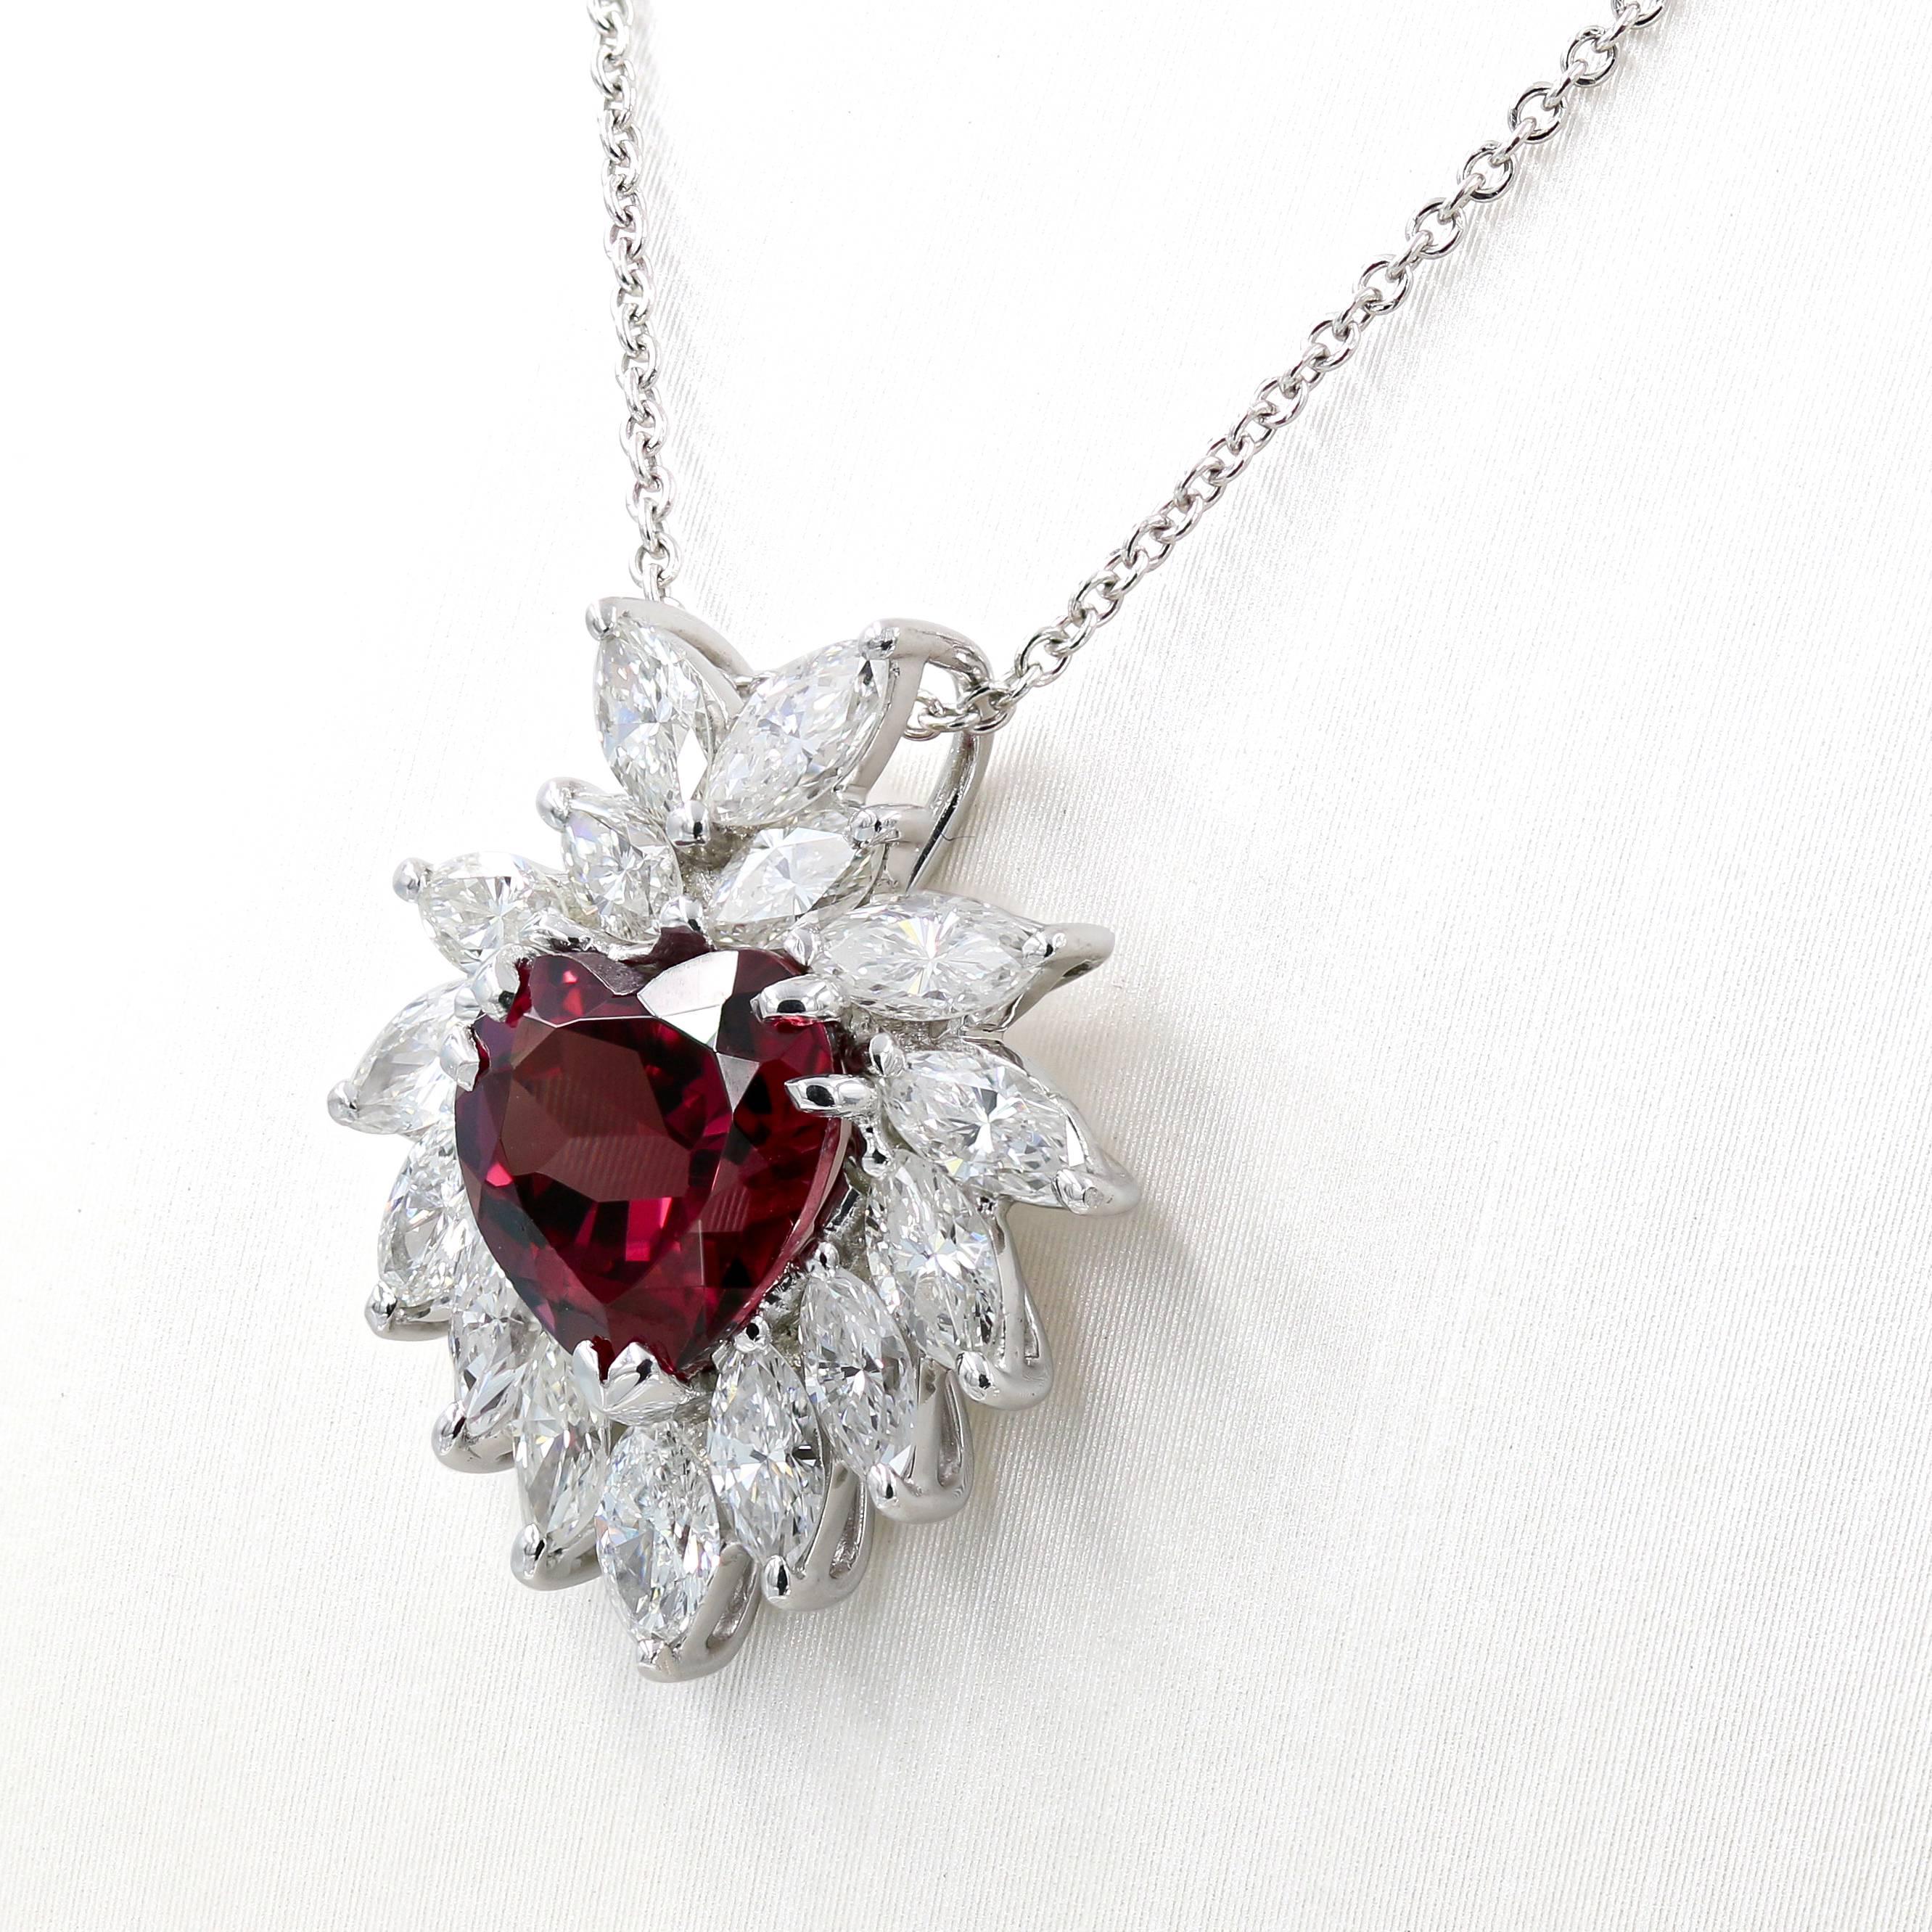 Contemporary Heart Shaped Rhodolite Garnet and Marquise Diamond Necklace in Platinum